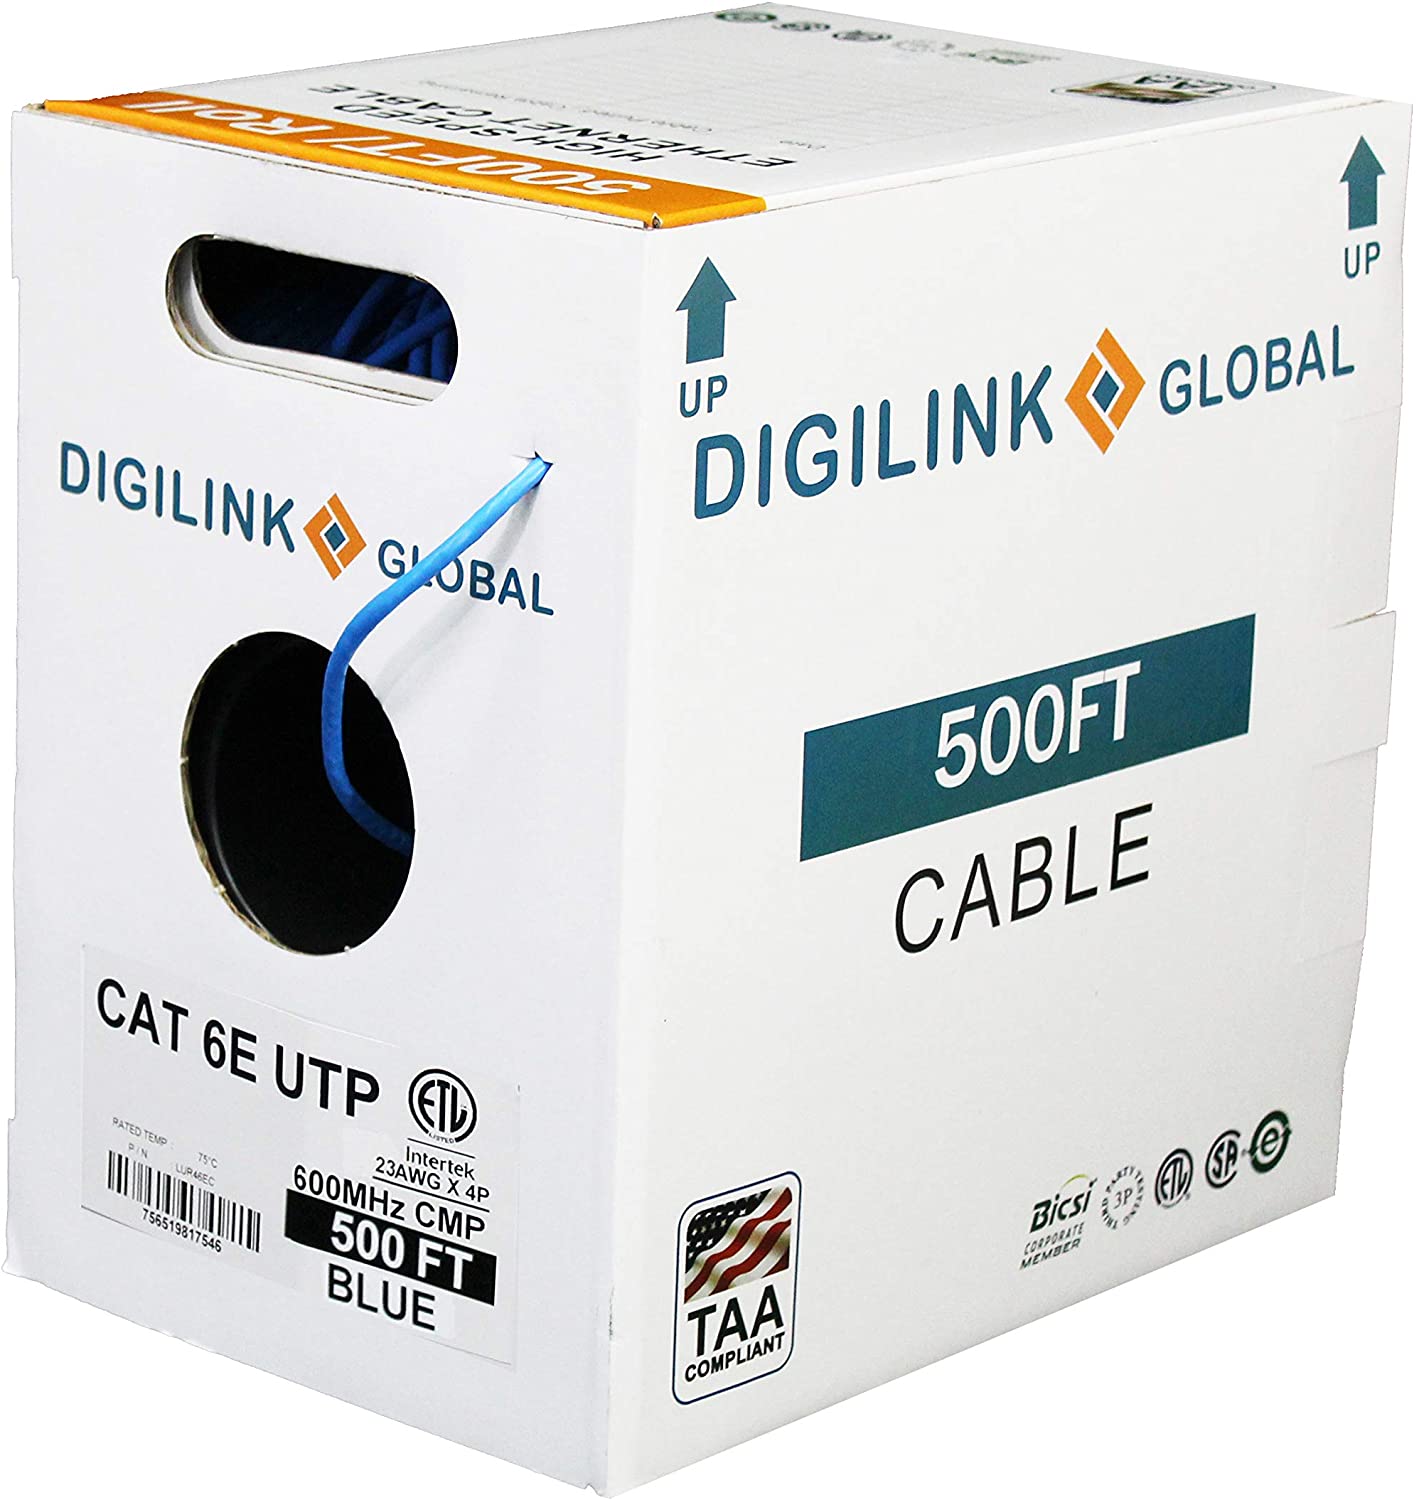 CAT6E Plenum (CMP), 500FT, UTP 23AWG, Solid Bare Copper, 600MHz, ETL  Certified, Bulk Ethernet Cable in Blue by Digilink Walmart Canada